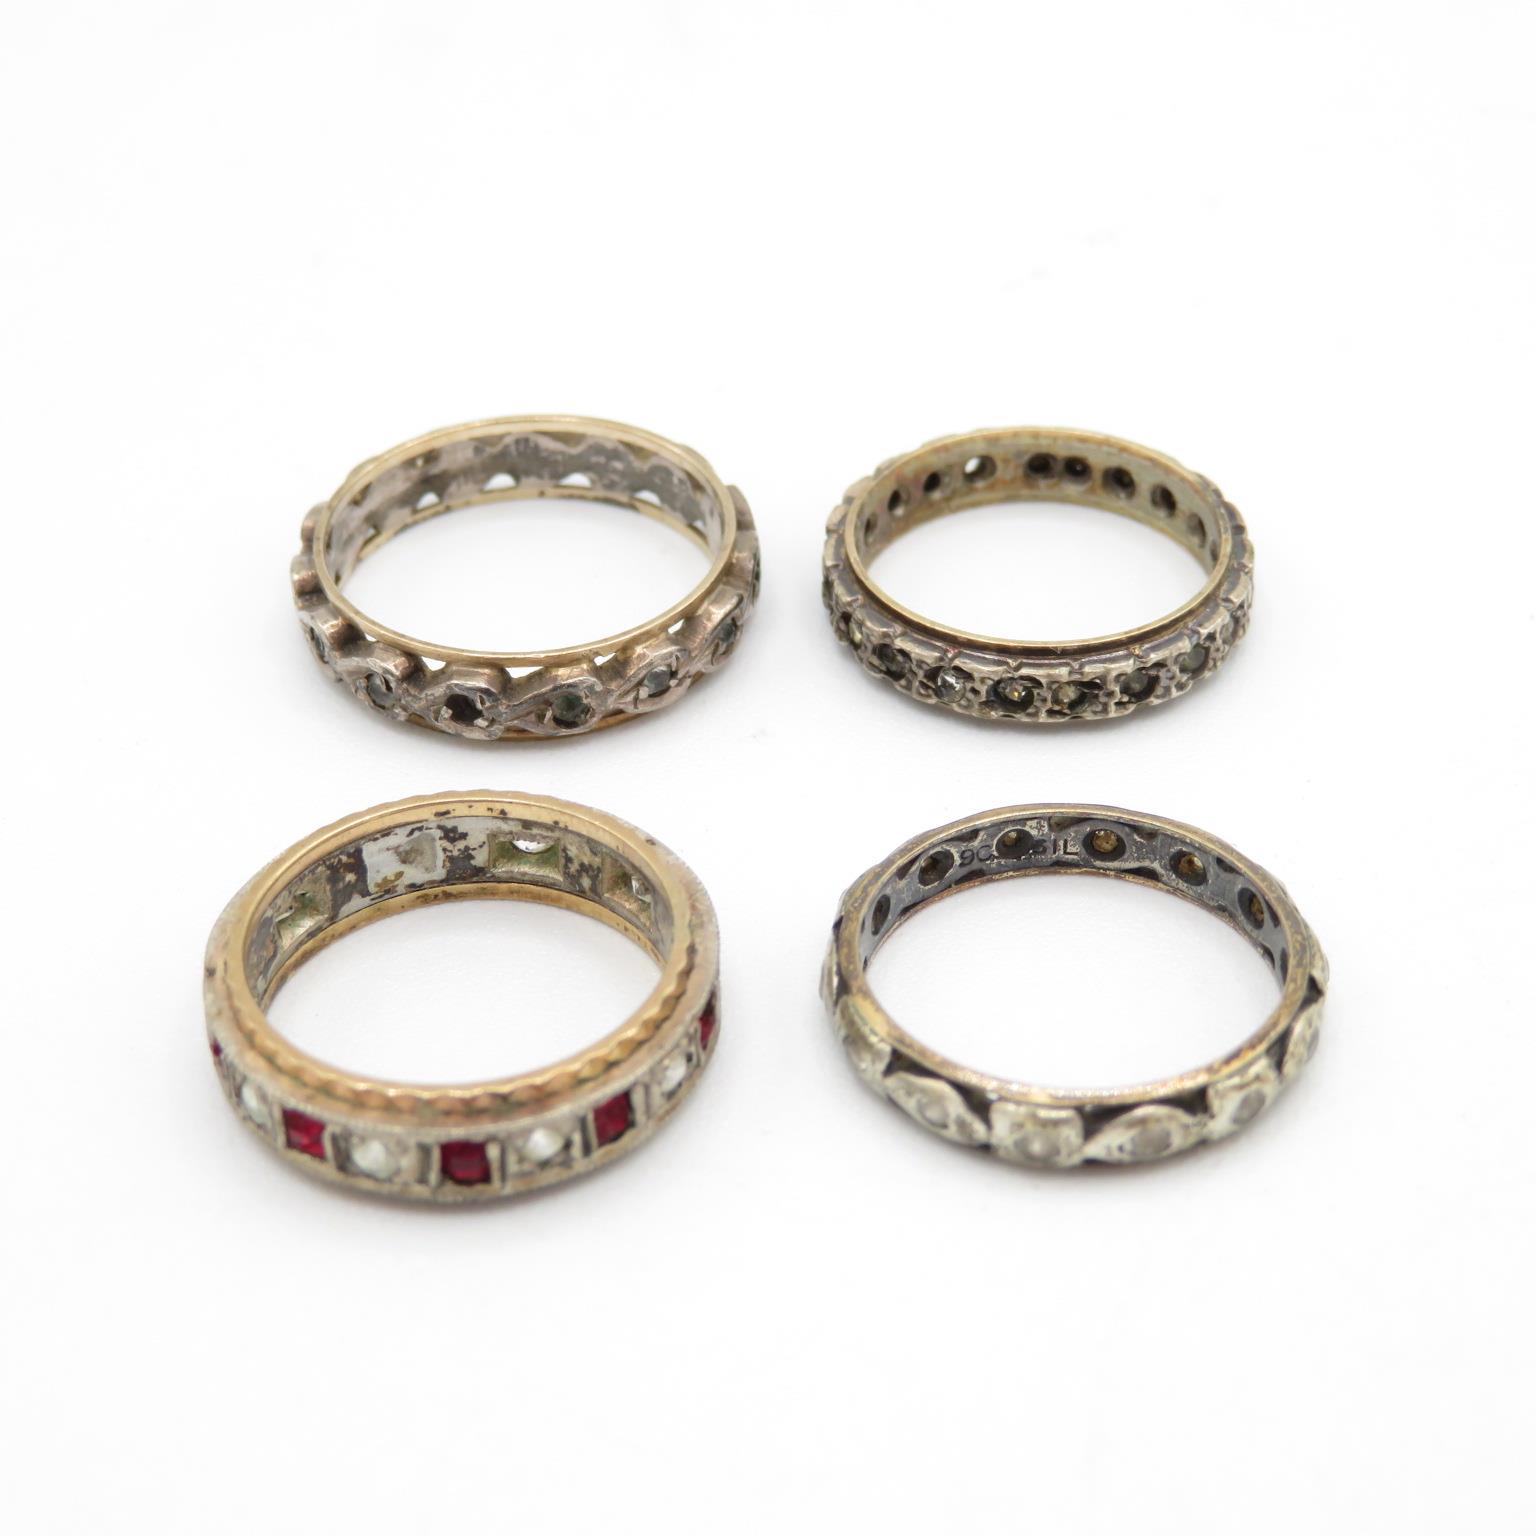 Collection of vintage gold and silver rings 10.2g